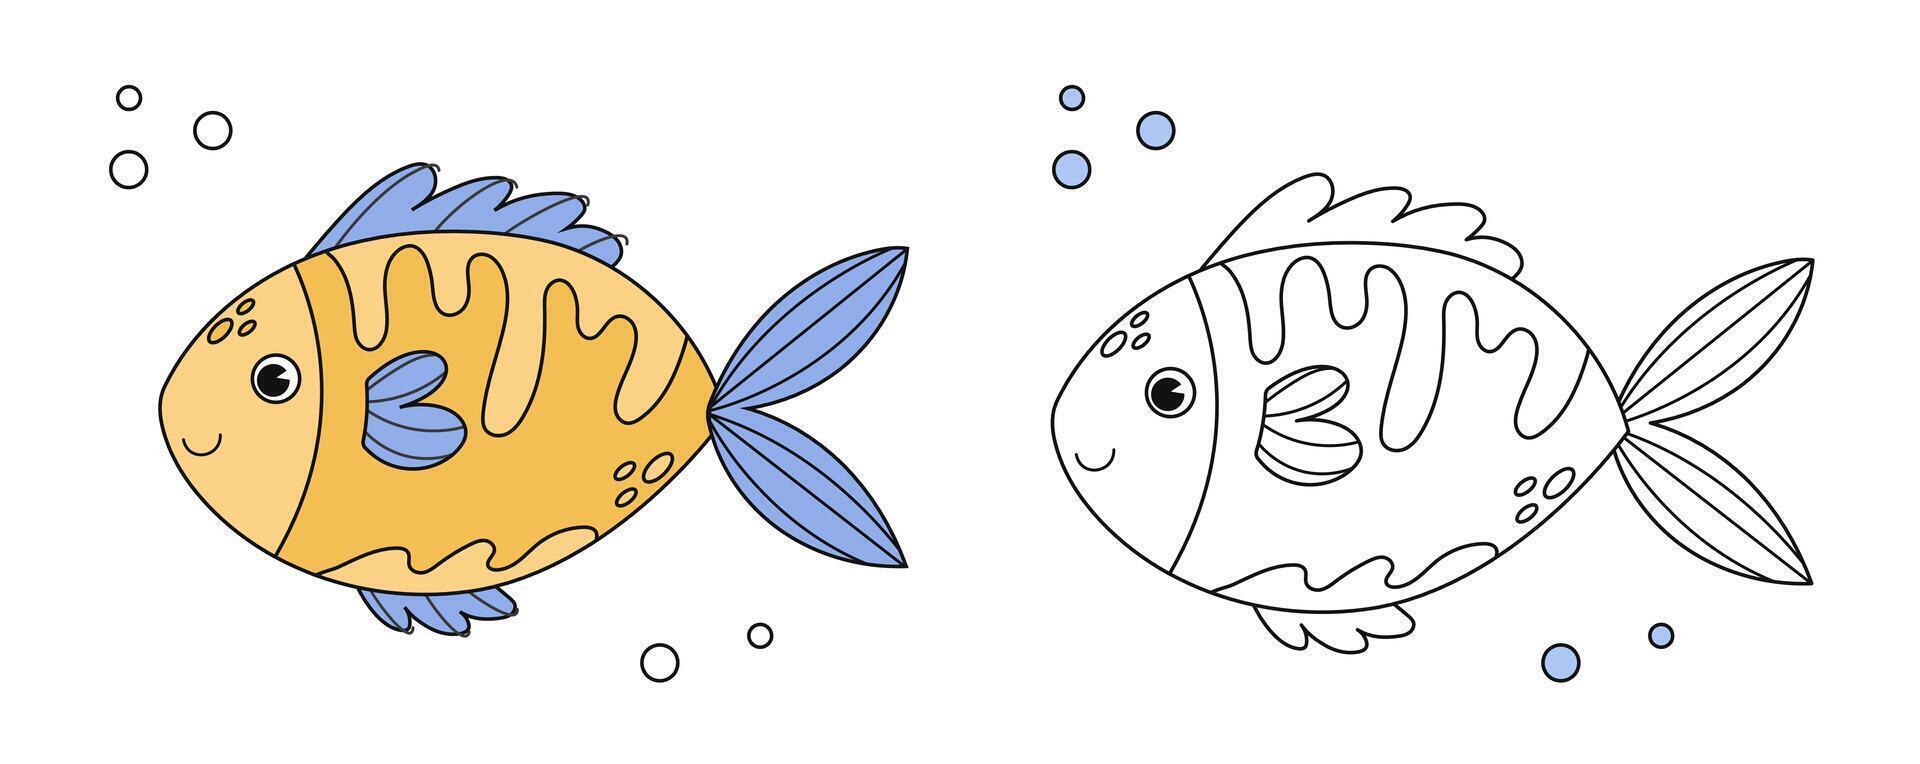 Goldfish coloring book with coloring example for kids. Coloring page with fish. Monochrome and color version. Vector childrens illustration